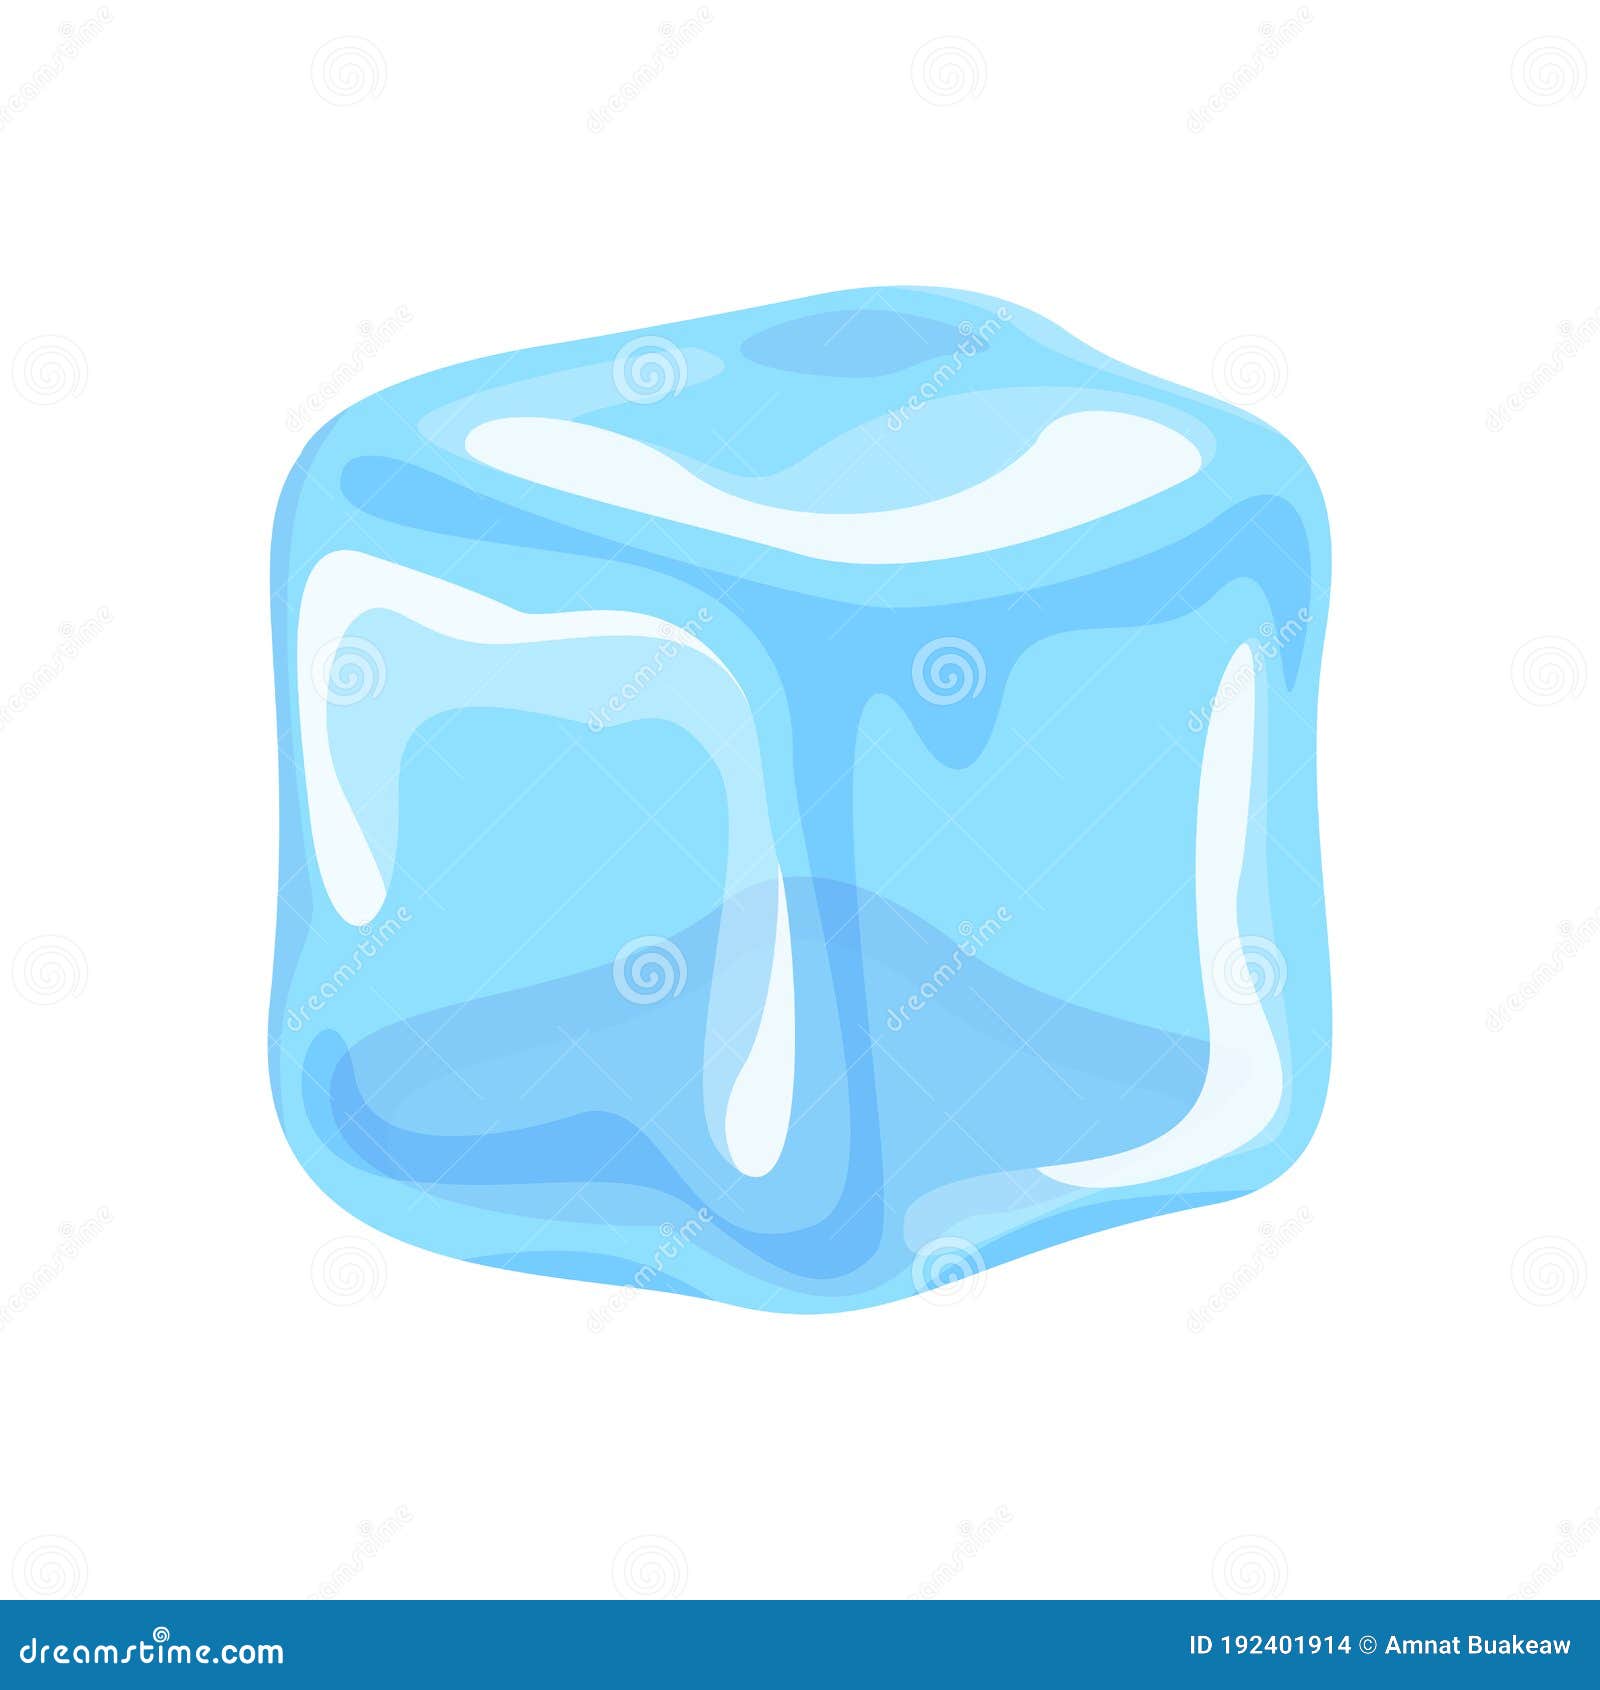 https://thumbs.dreamstime.com/z/ice-cube-isolated-white-background-clip-art-three-cubes-illustrations-transparent-192401914.jpg